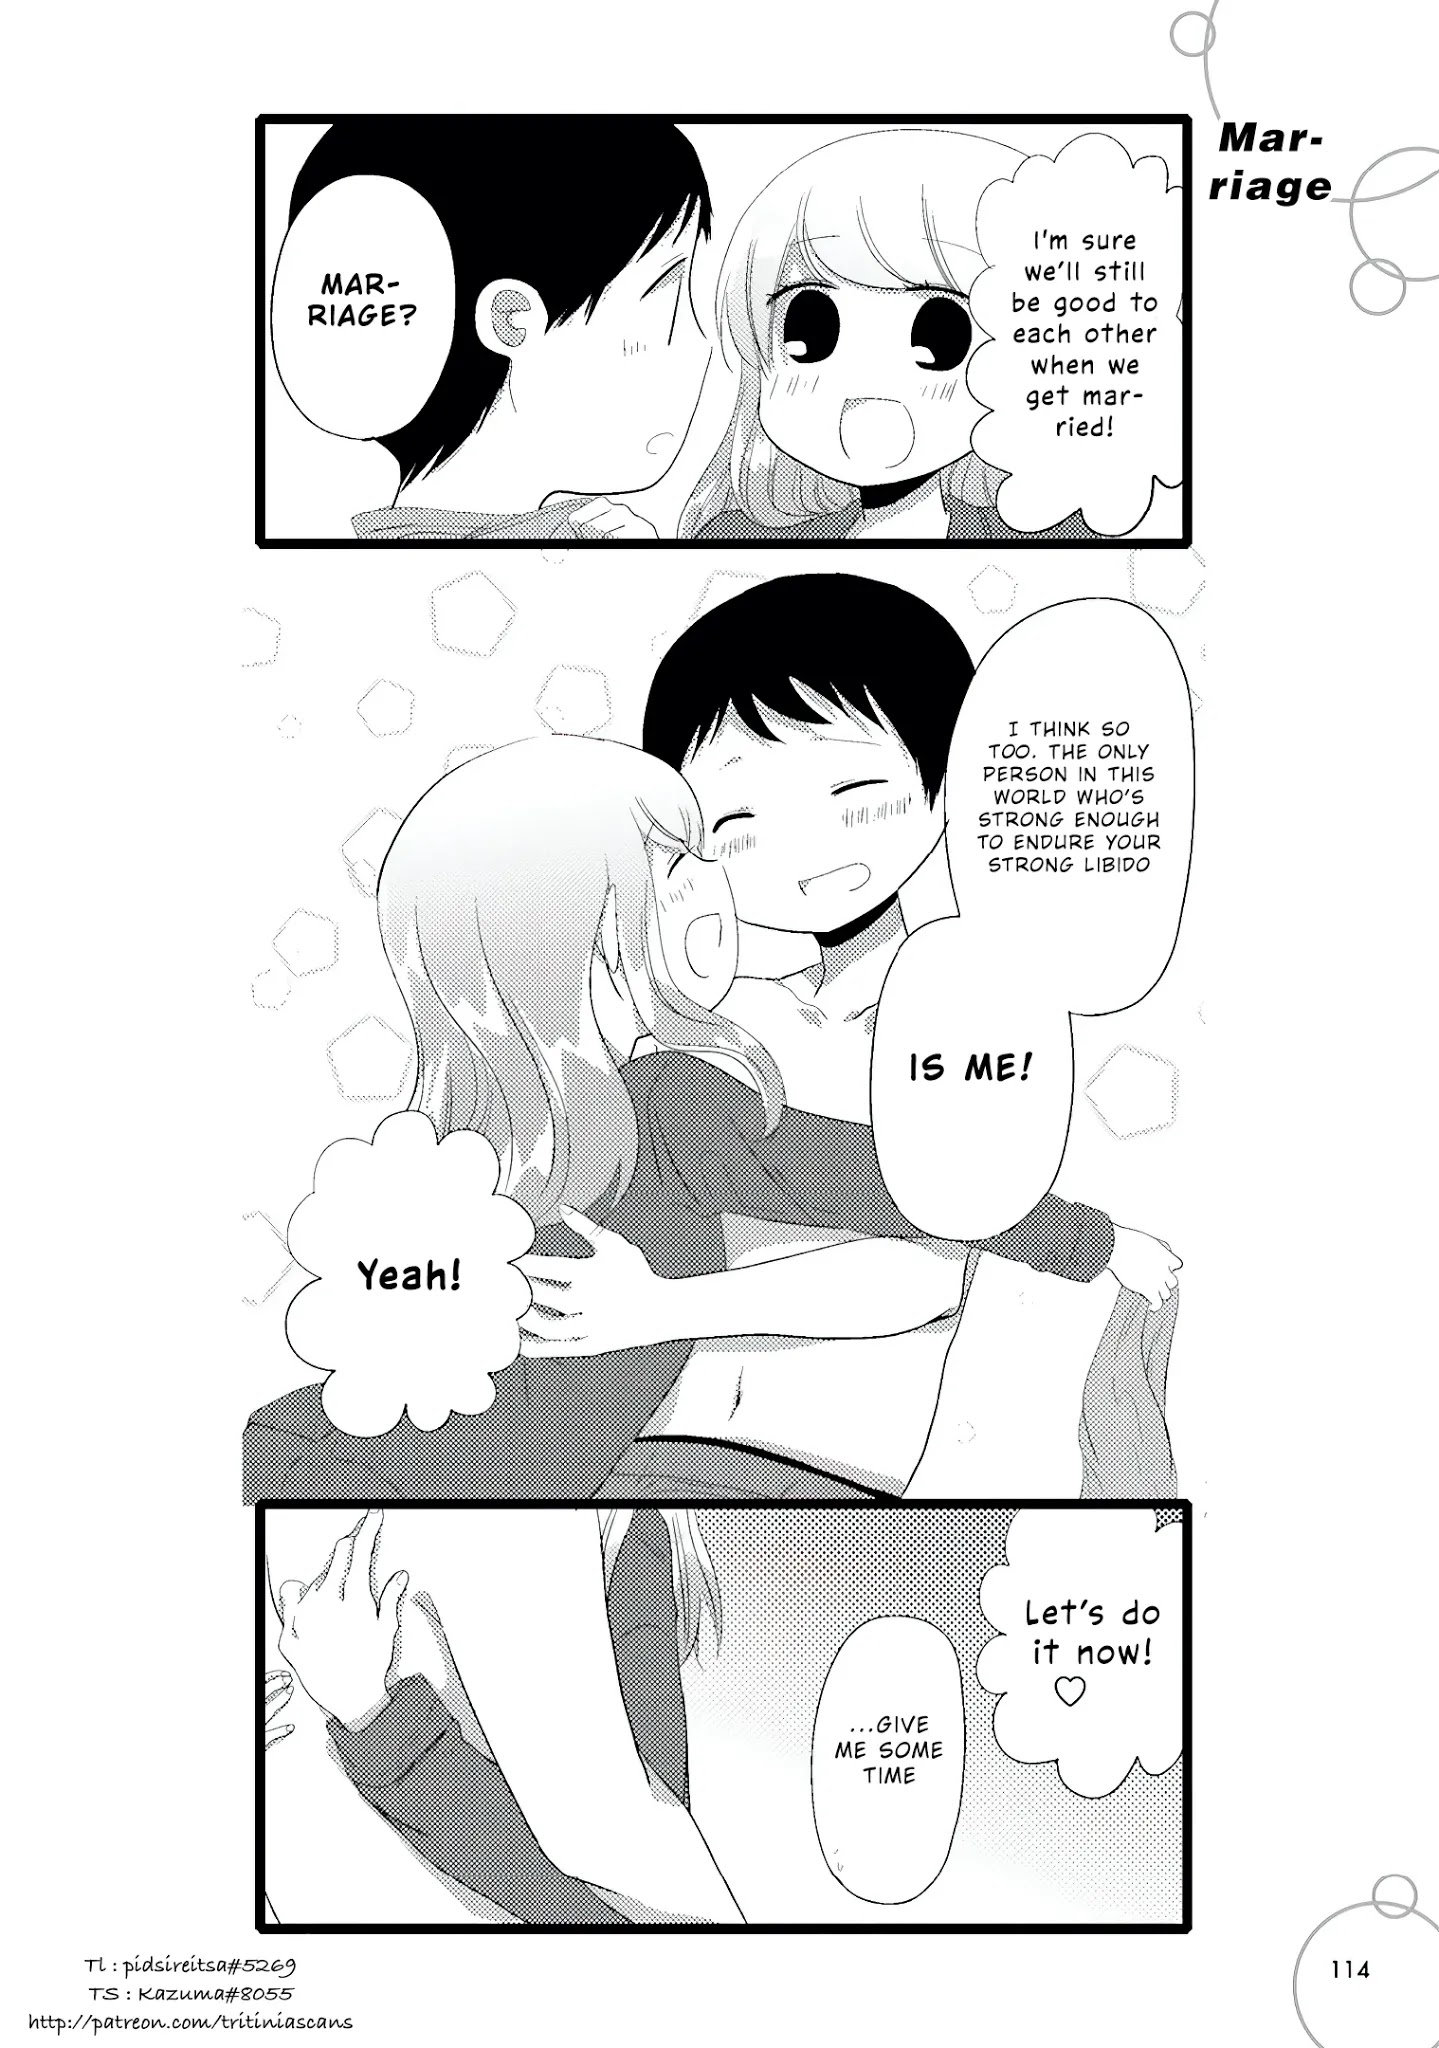 I'm In Trouble With Her High Libido - chapter 102 - #1